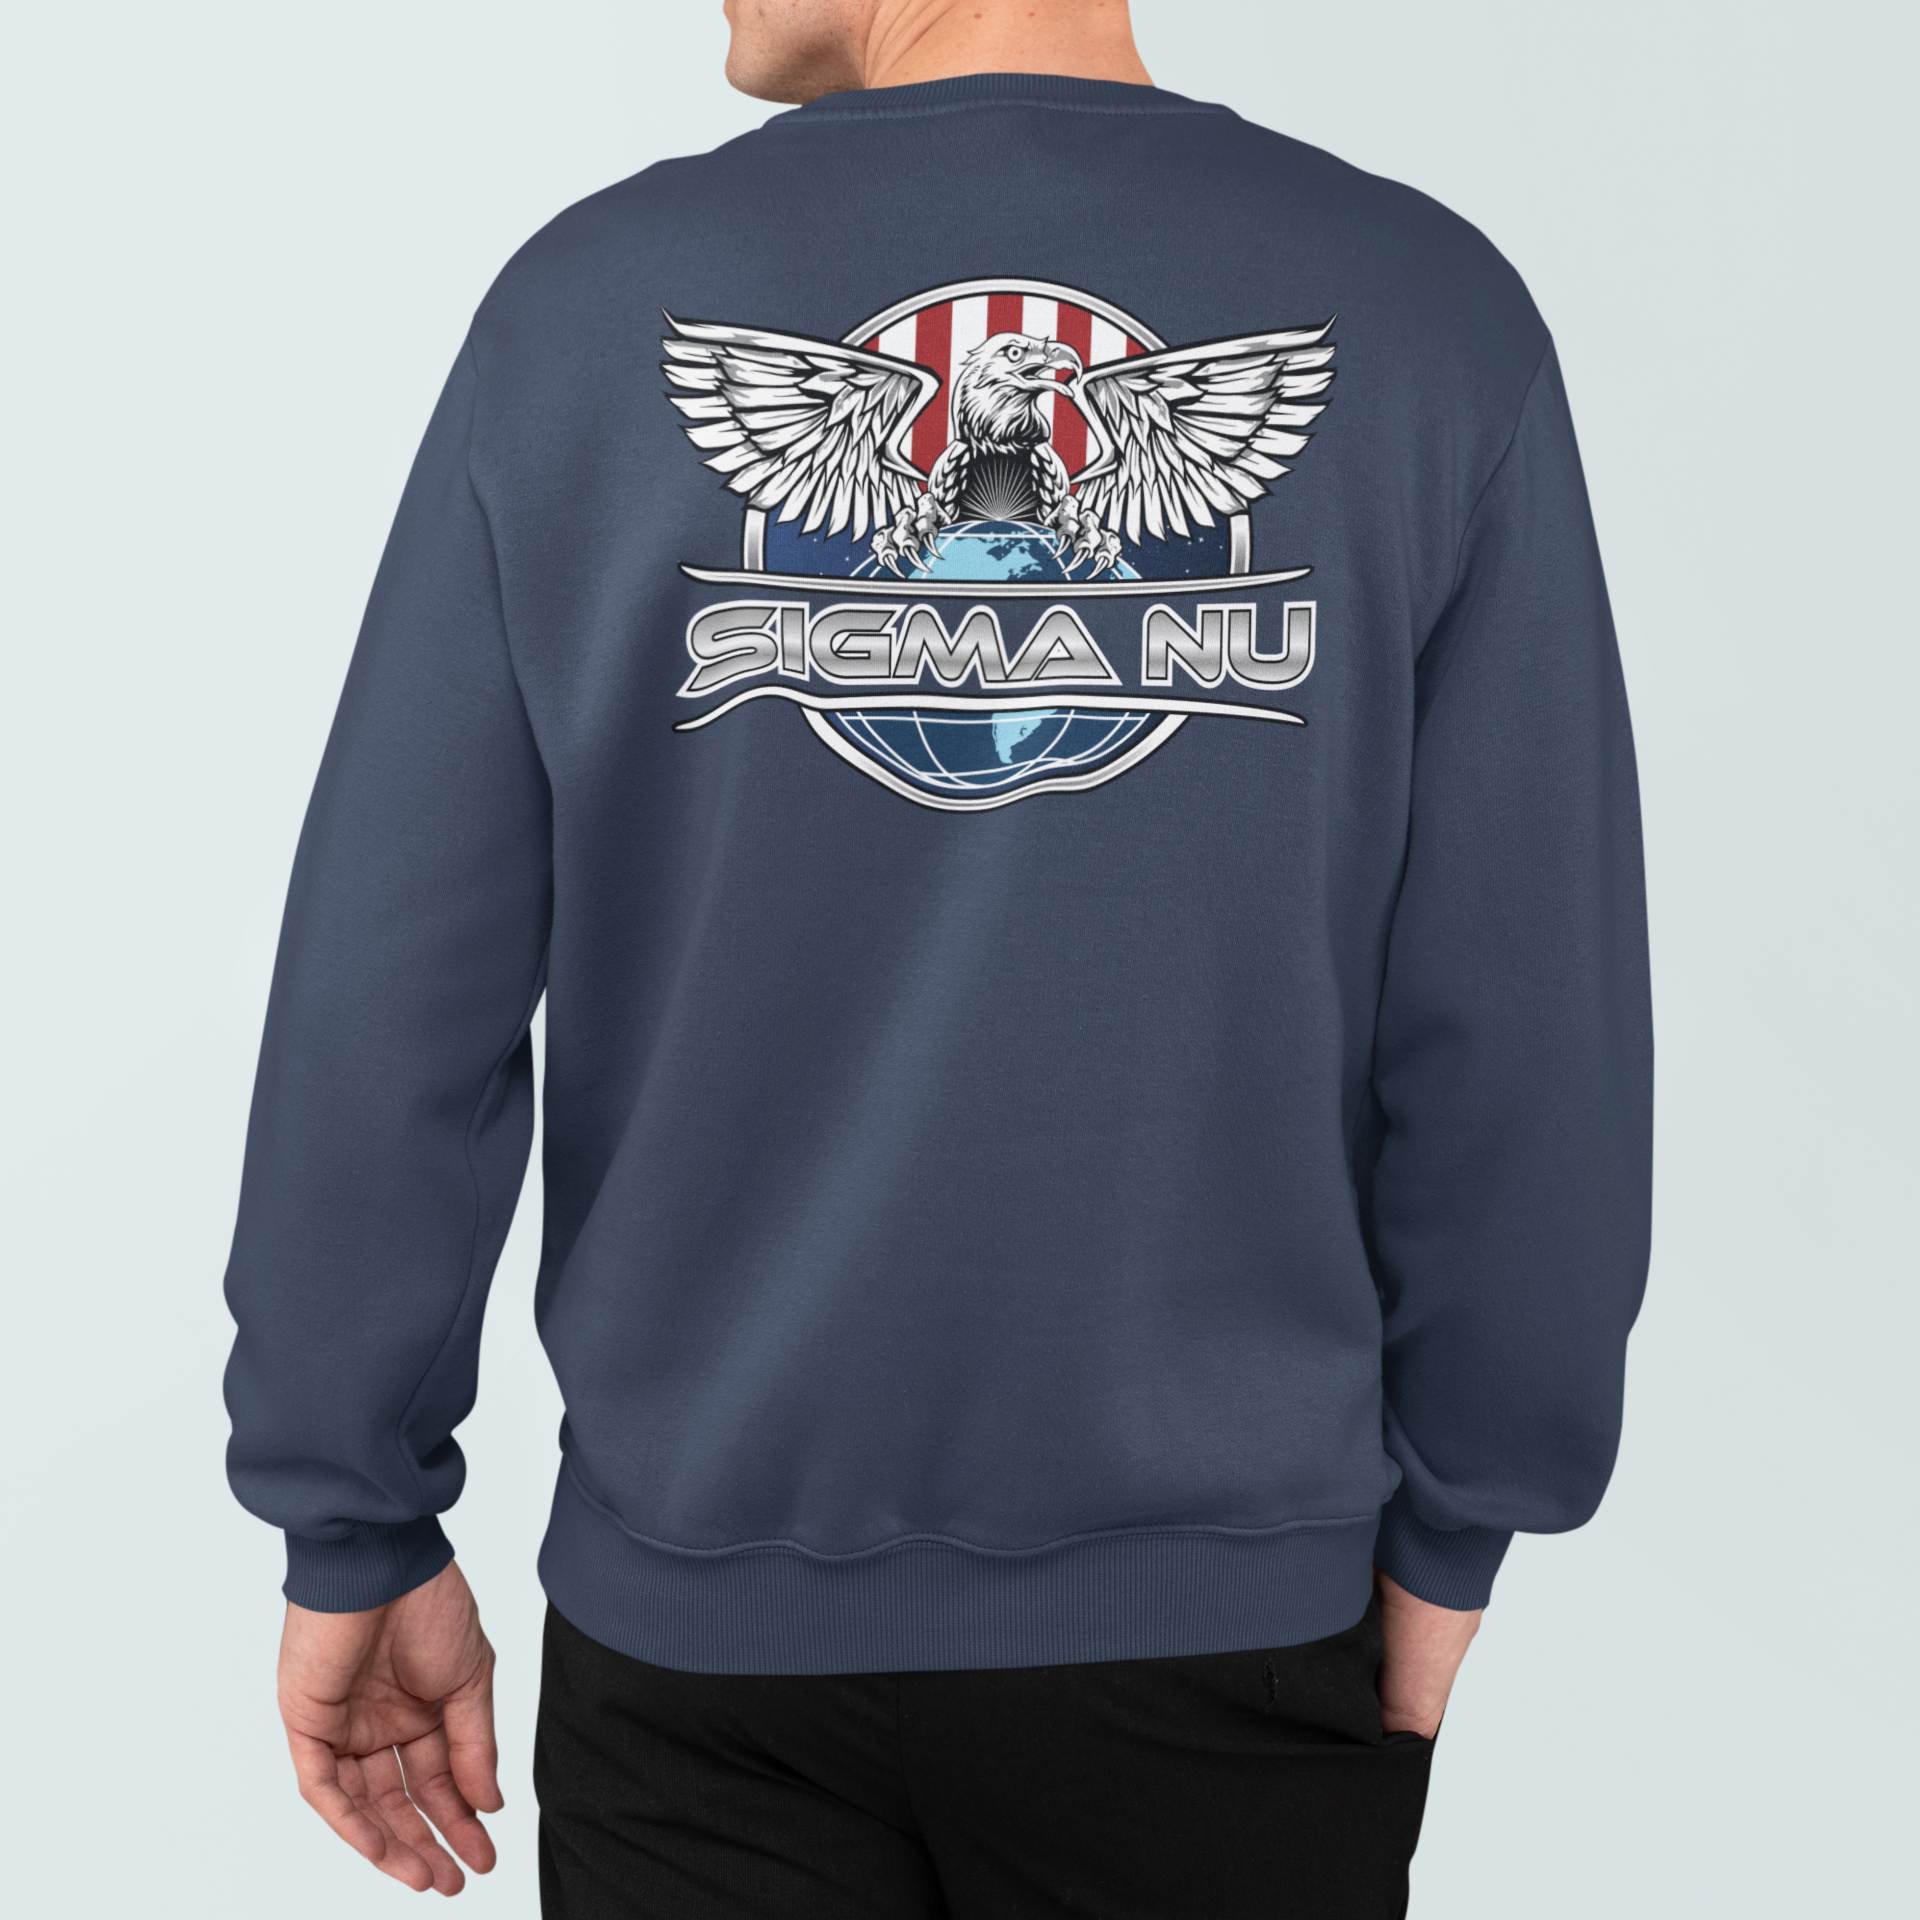 Navy Sigma Nu Graphic Crewneck Sweatshirt | The Fraternal Order | Sigma Nu Clothing, Apparel and Merchandise model